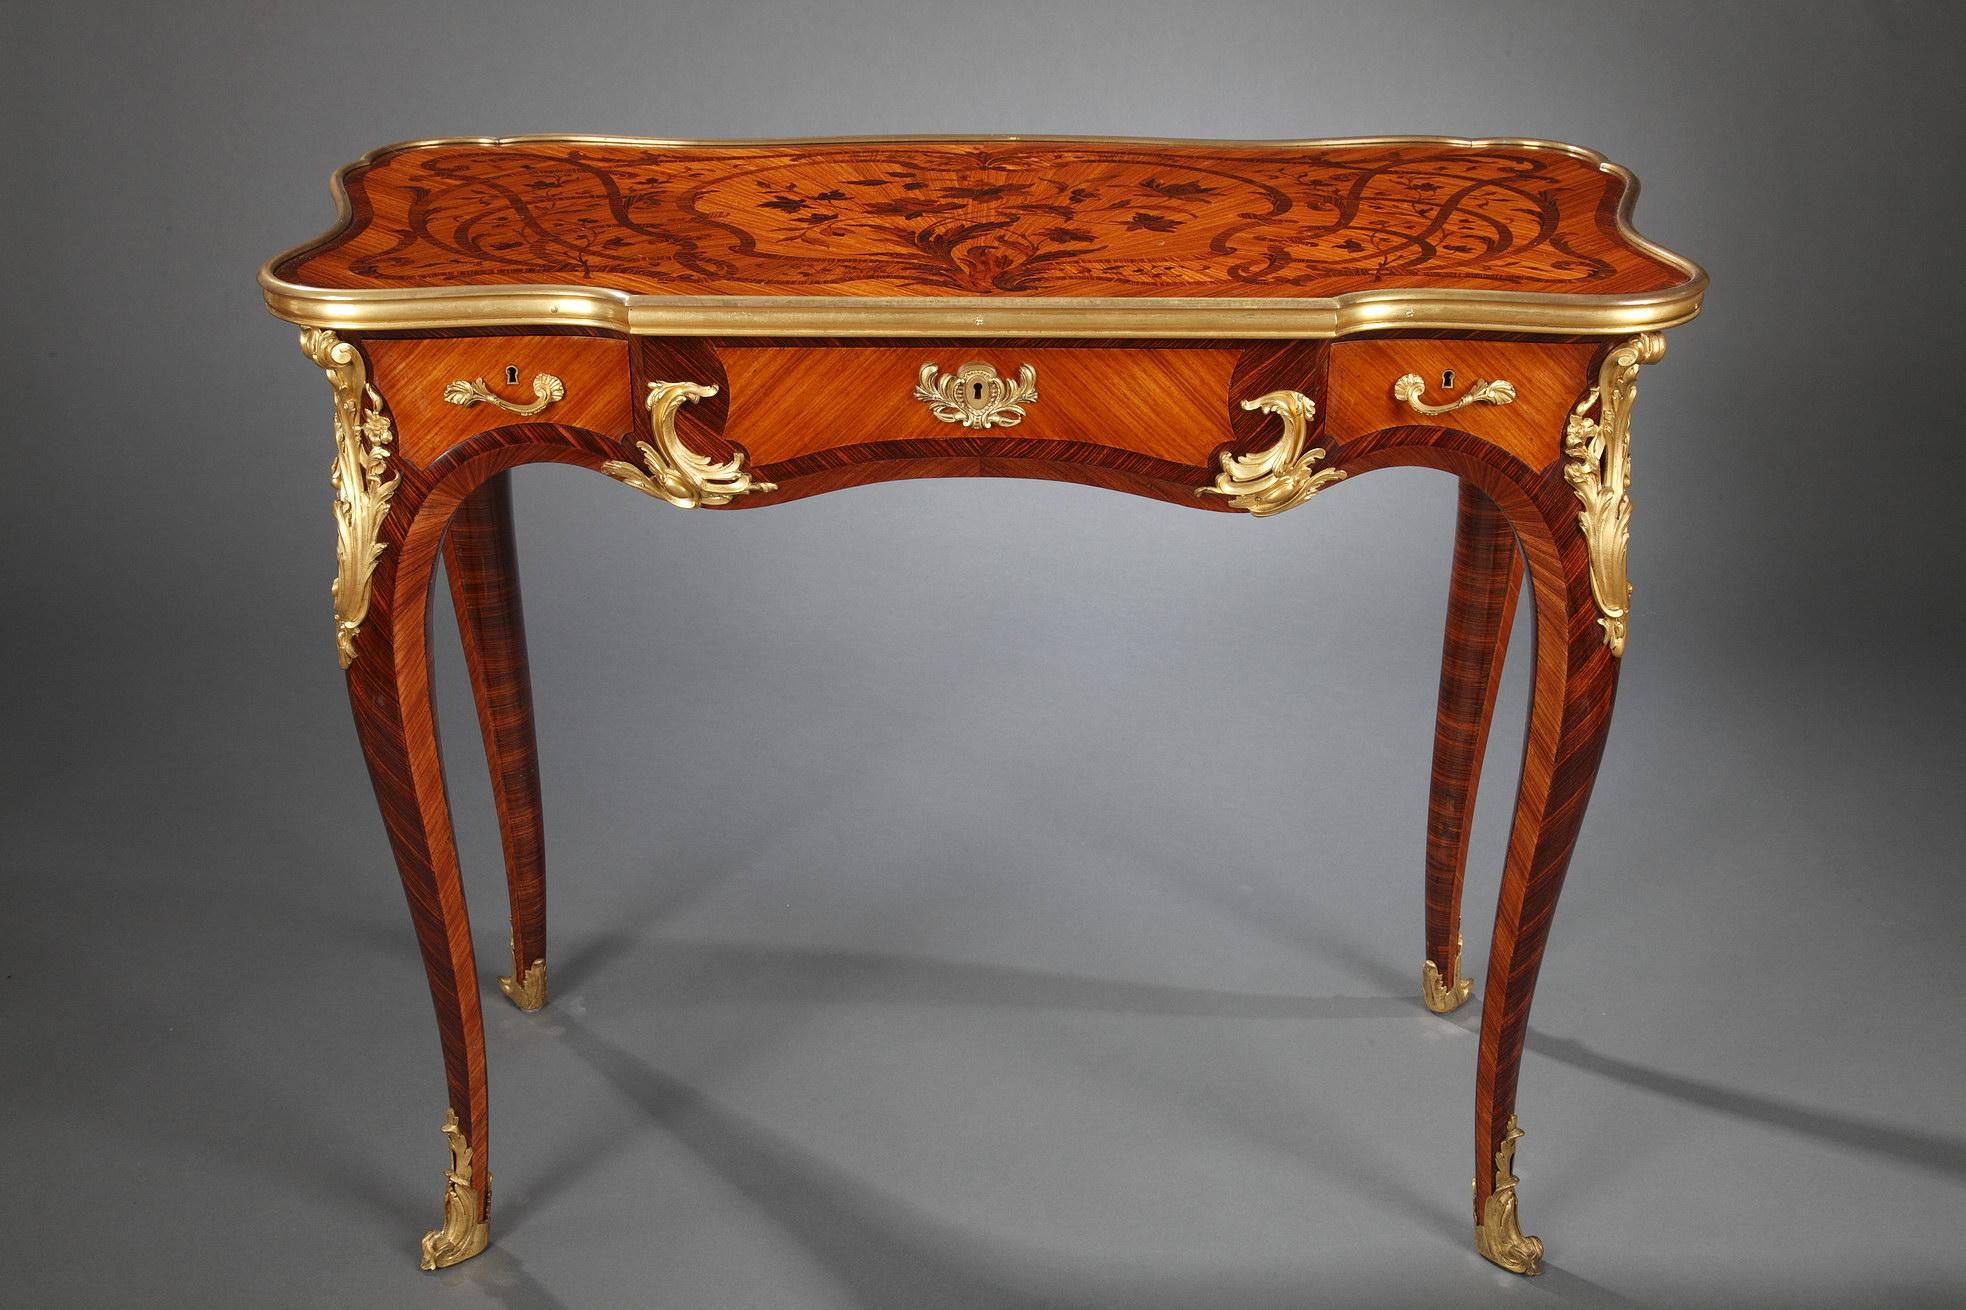 Charming Louis XV style table by Sormani, opening with three drawers. The waved rectangular tray, adorned with a floral bois-de-bout marquetry, is circled by a gilded bronze mold. It rests on four cabriole legs surmounted by a gilt-bronze mount and